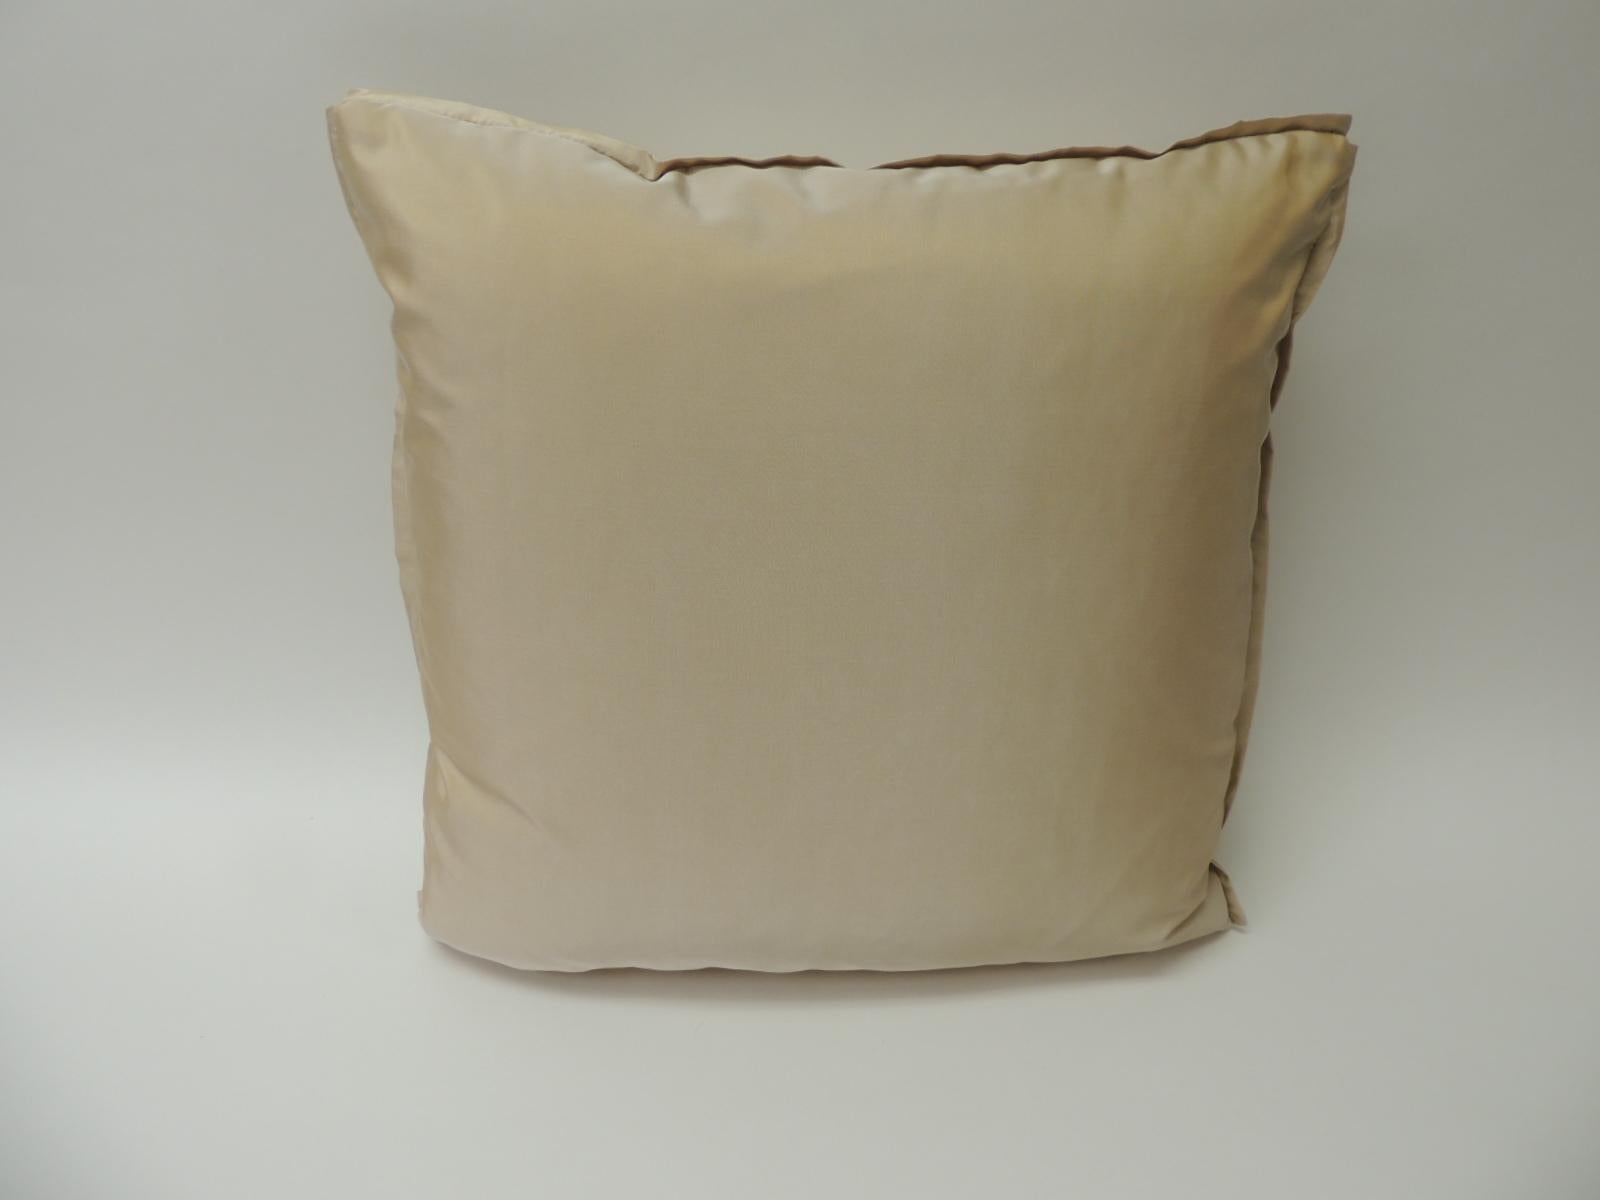 Hand-Crafted Vintage Fortuny “Ashanti” Copper on Silvery Decorative Pillow